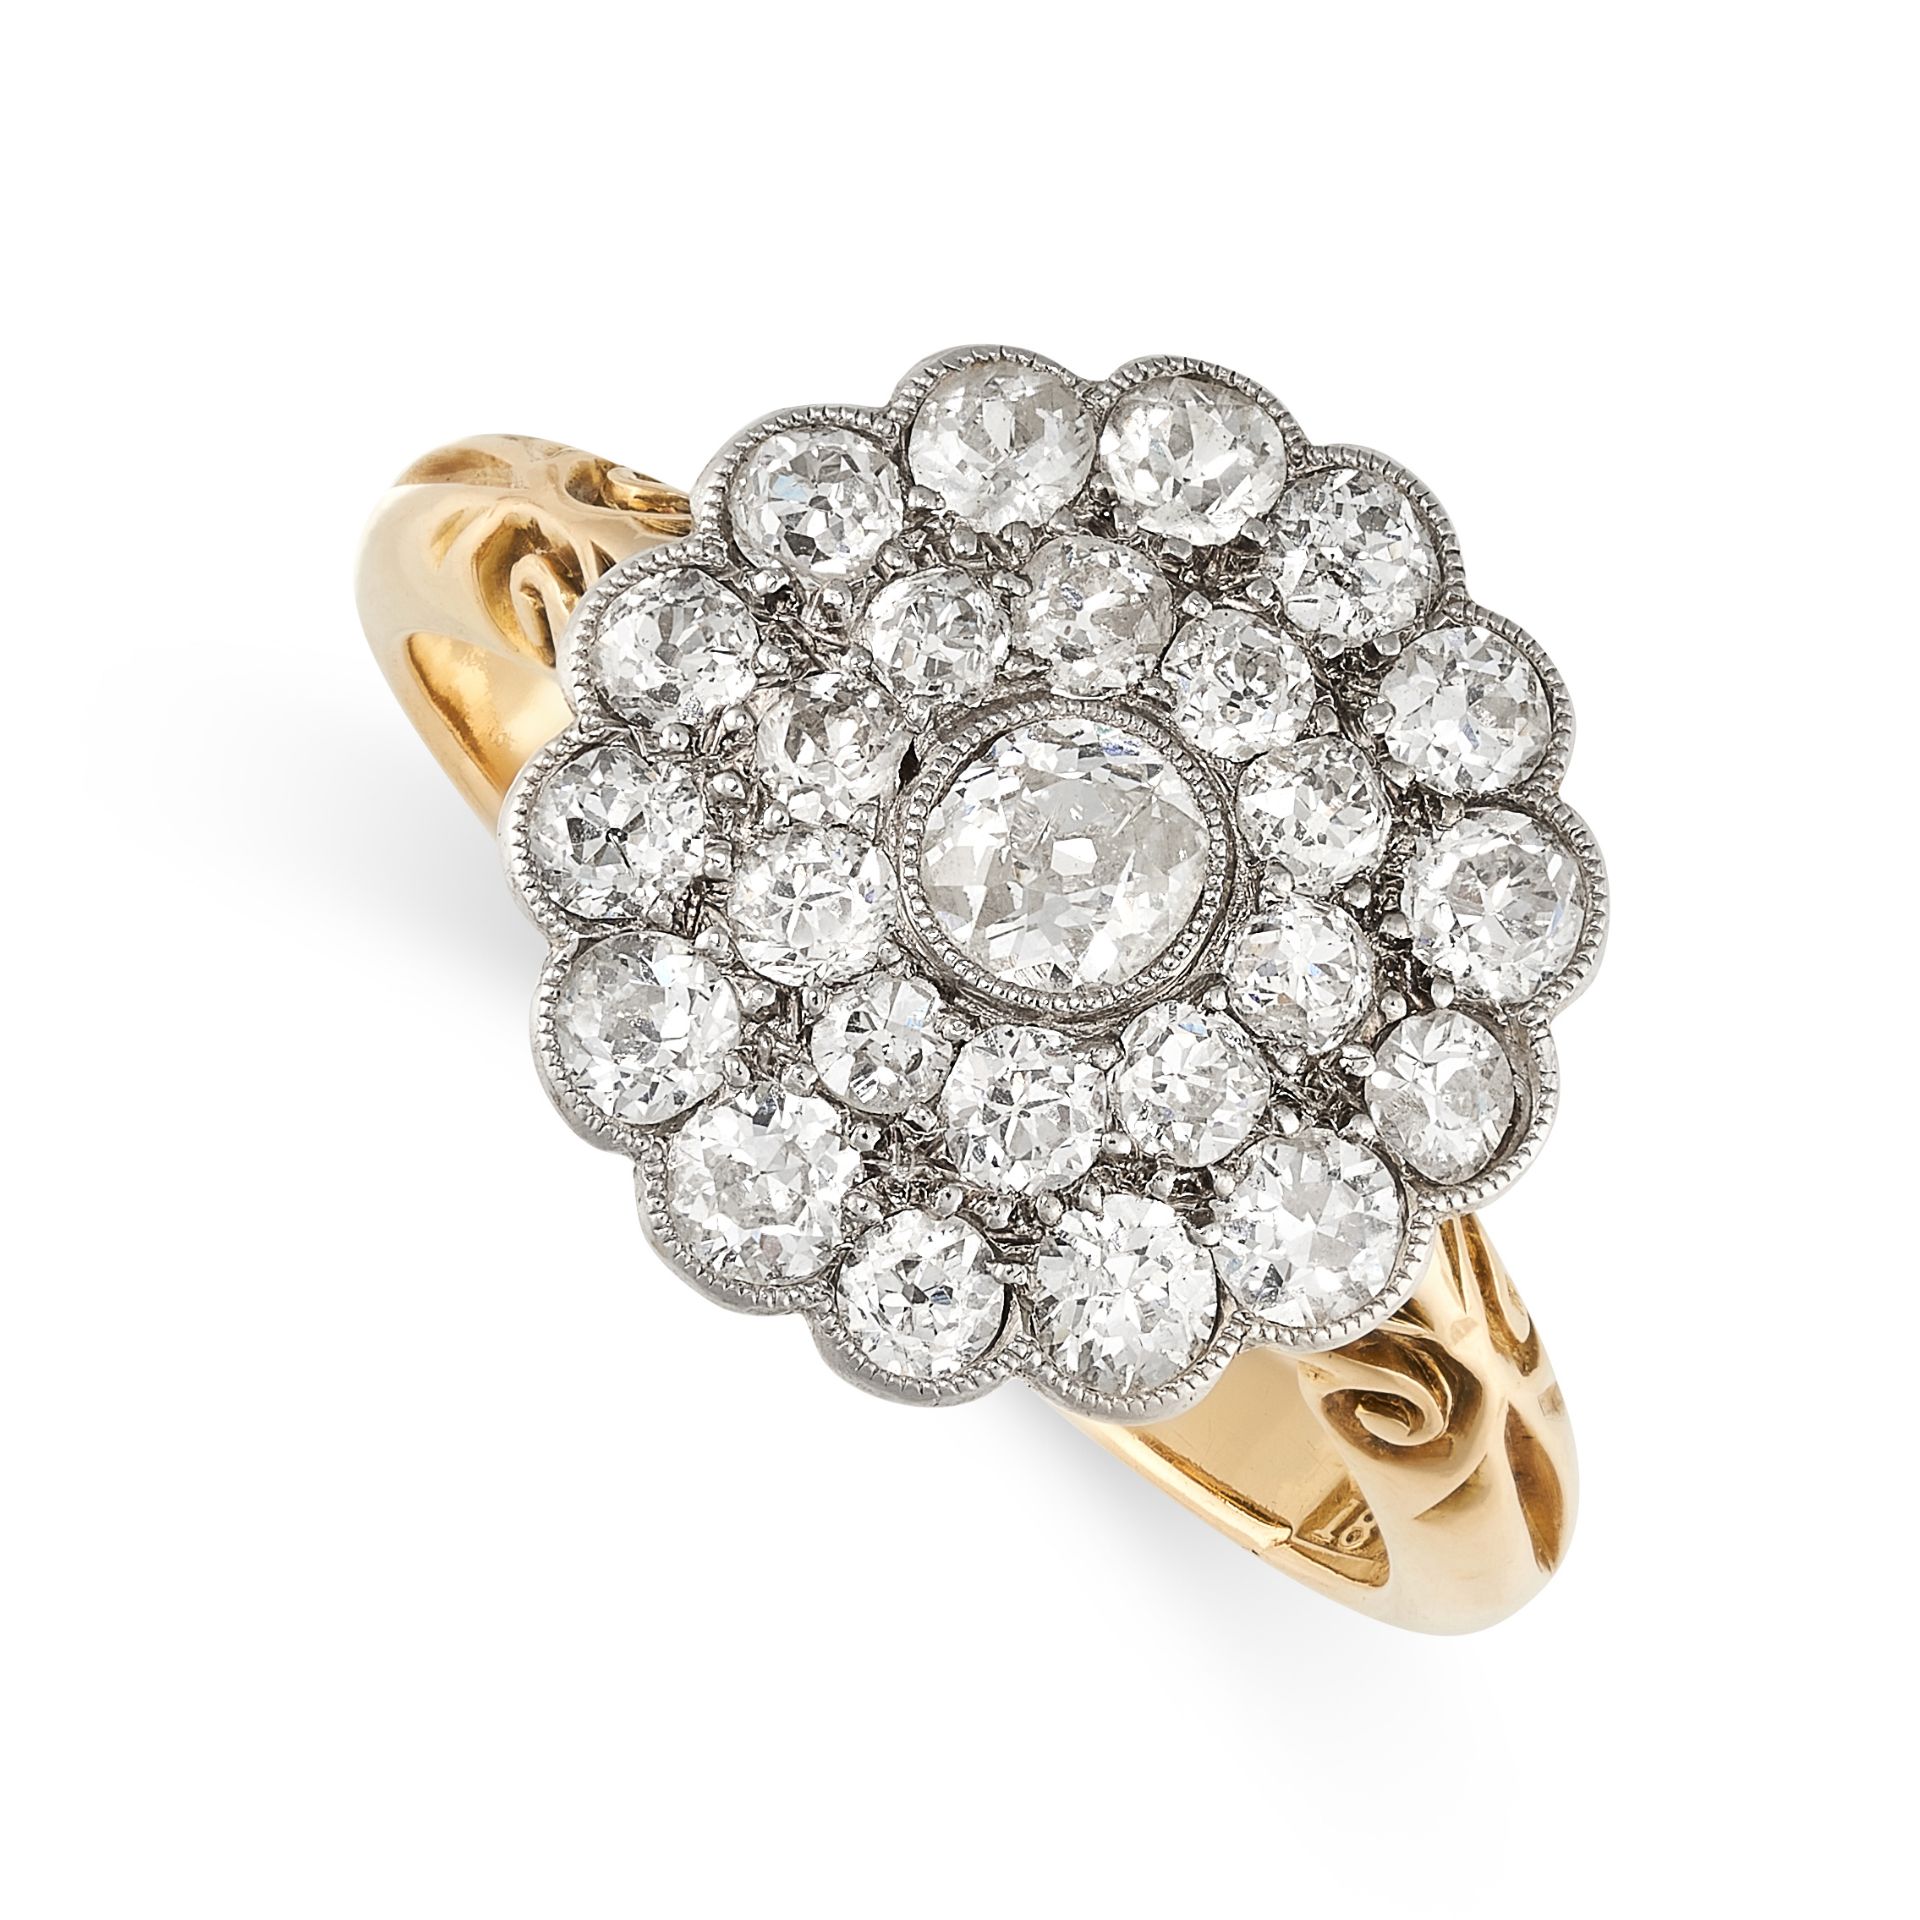 NO RESERVE - A DIAMOND CLUSTER DRESS RING in 18ct yellow gold and platinum, set with a central old